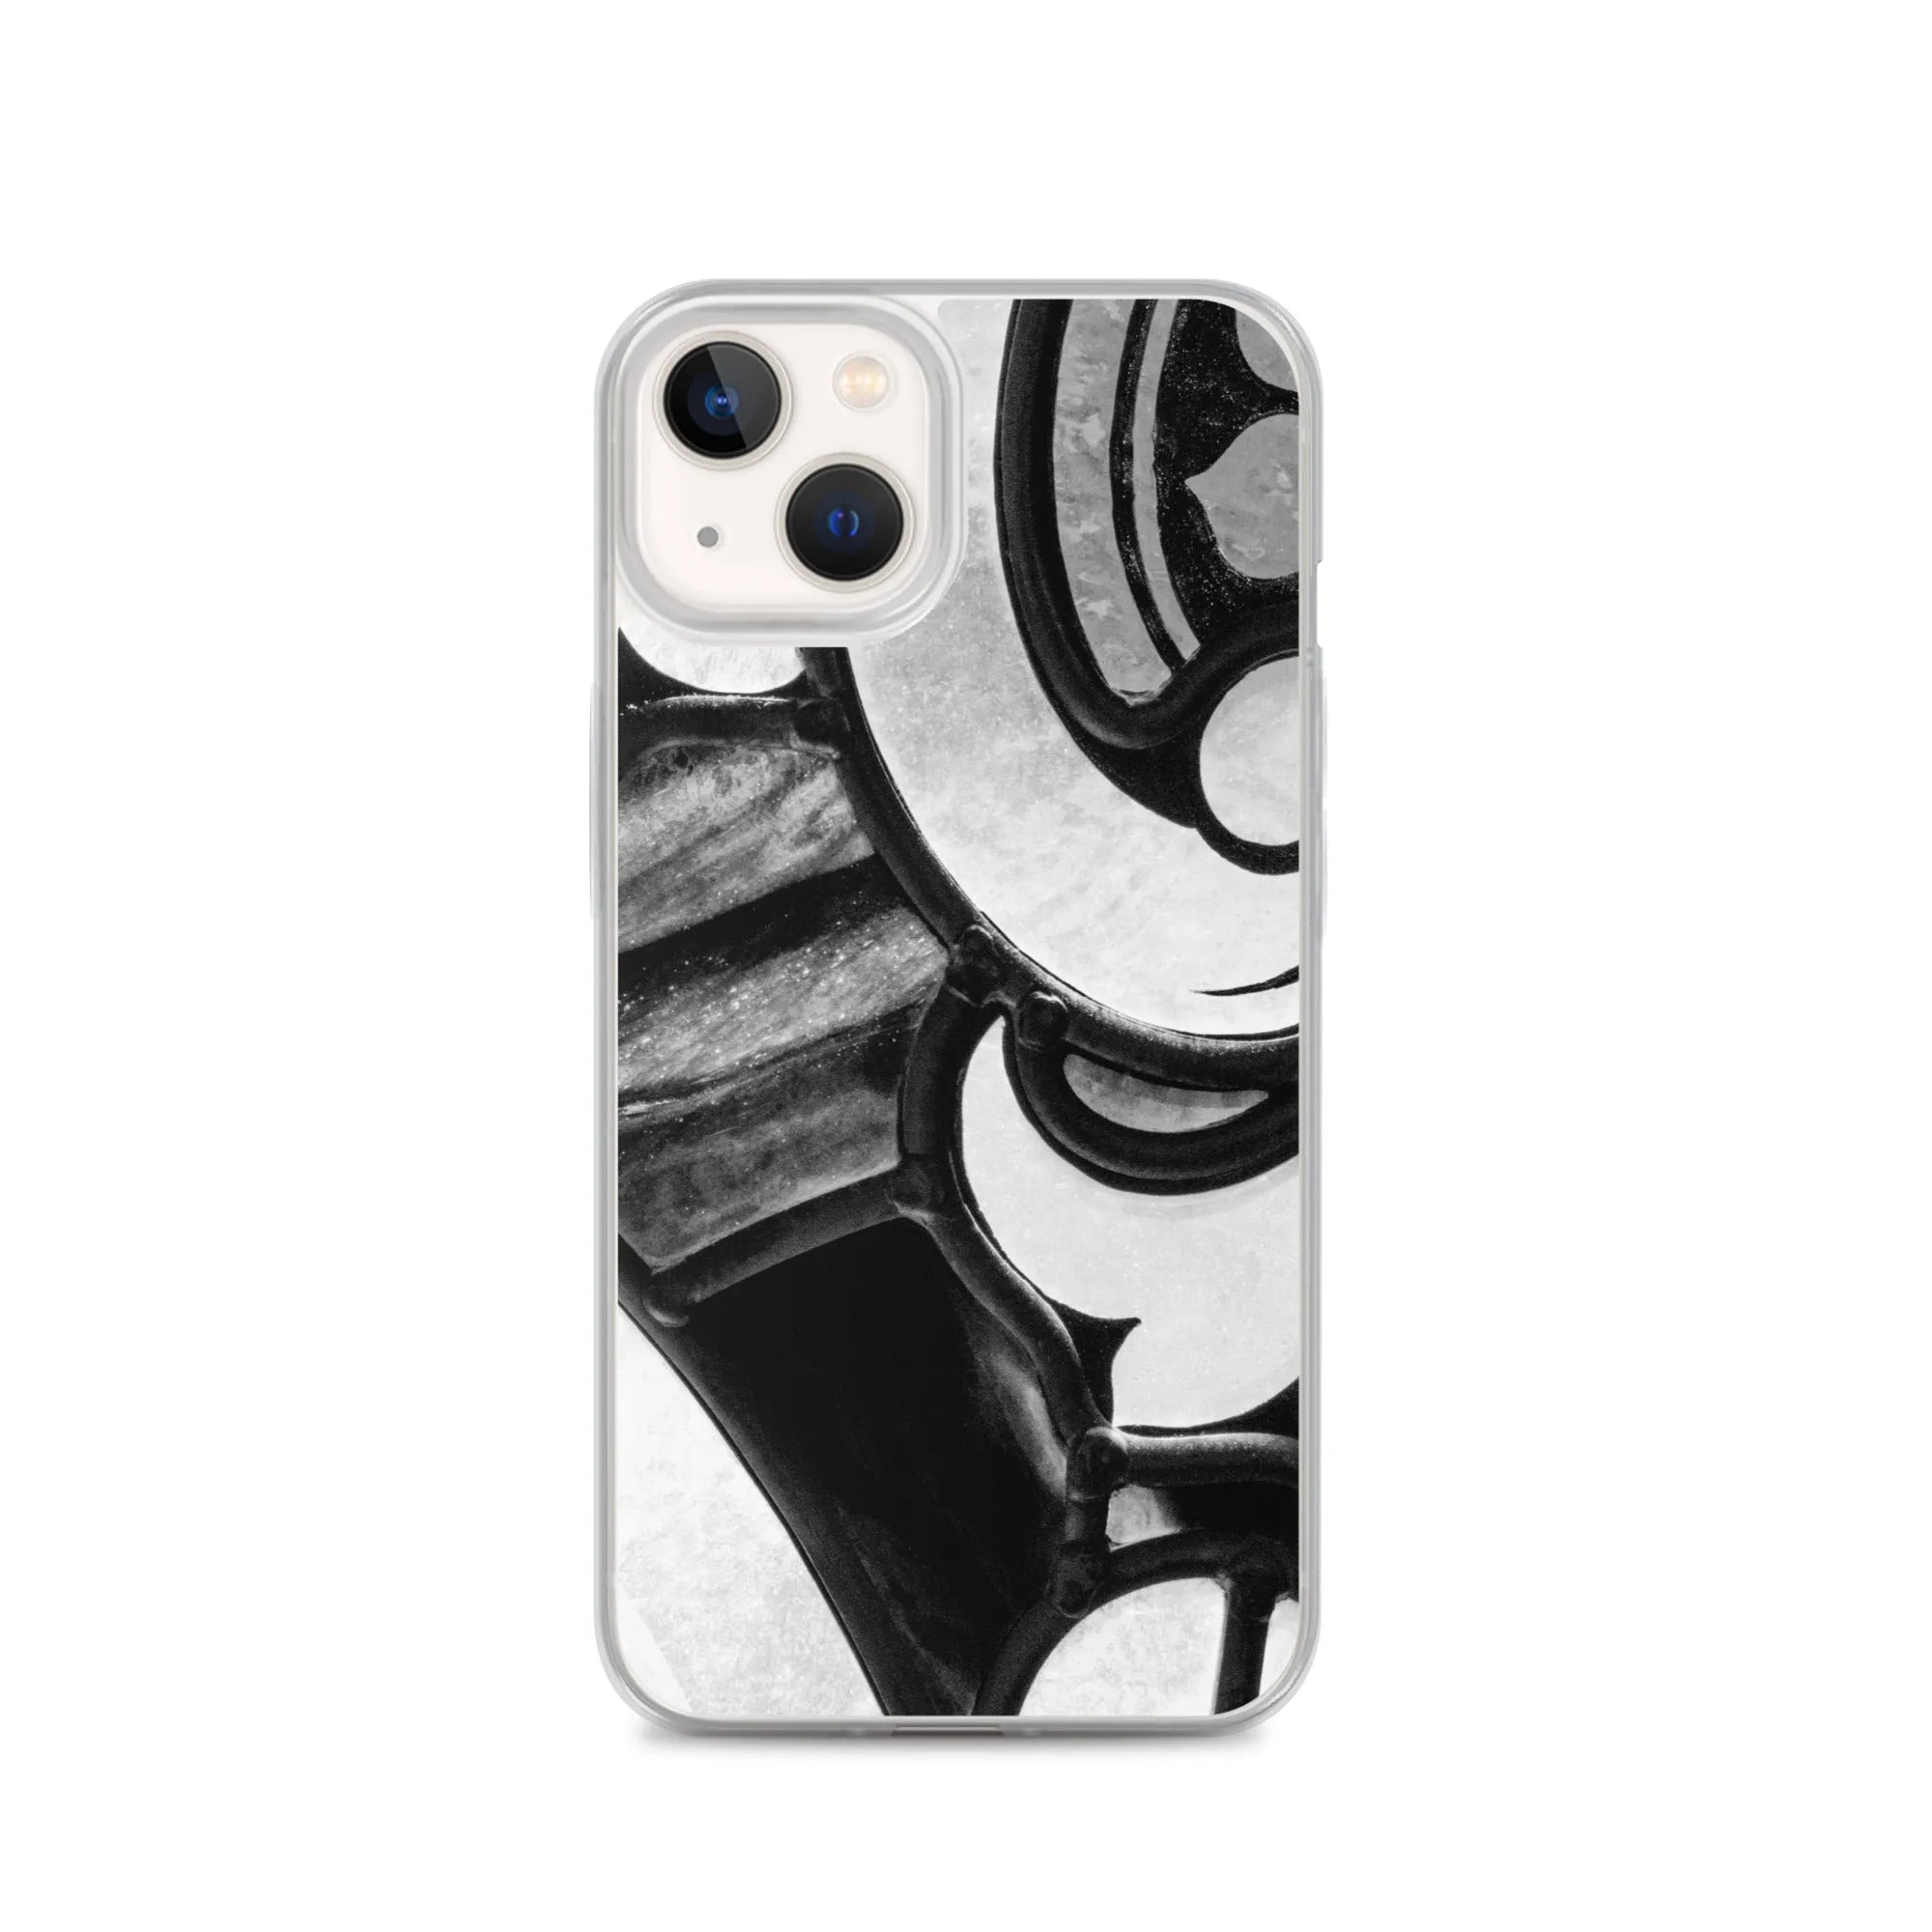 Stay Glassy - Designer Travels Art Iphone Case - Black And White - Iphone 13 - Mobile Phone Cases - Aesthetic Art